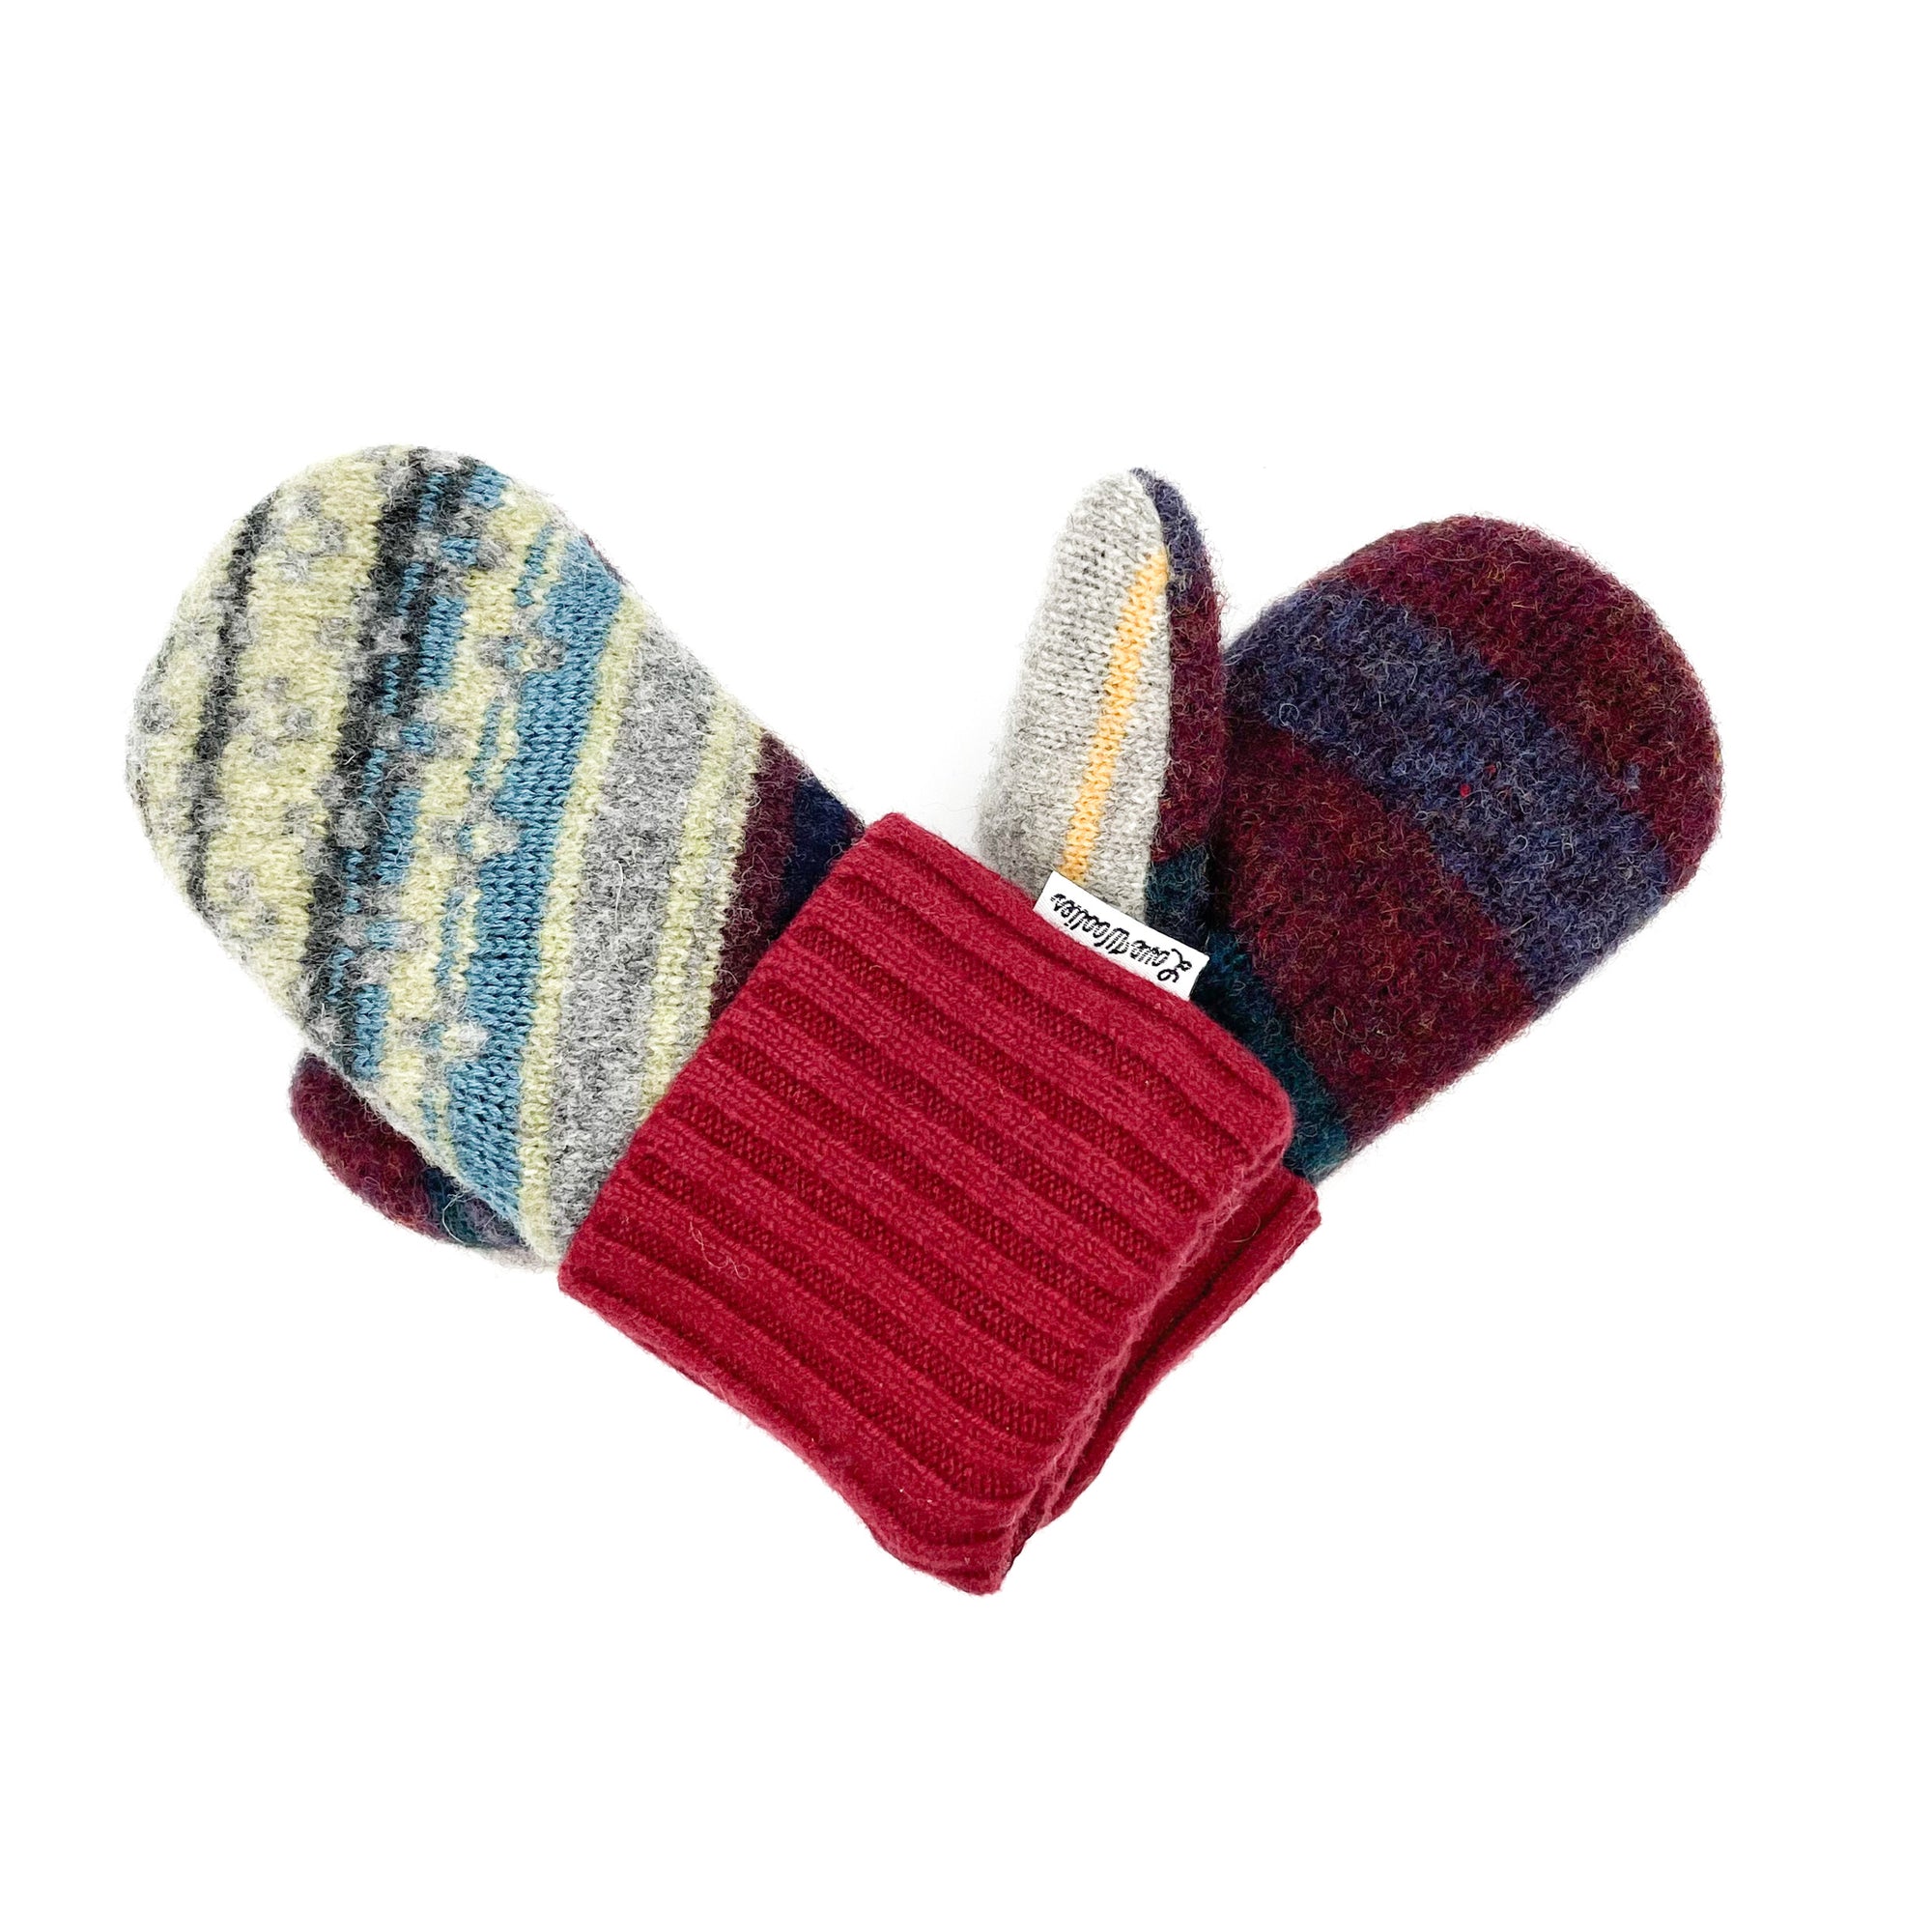 Small Kid's Wool Sweater Mittens | My Special Quilt